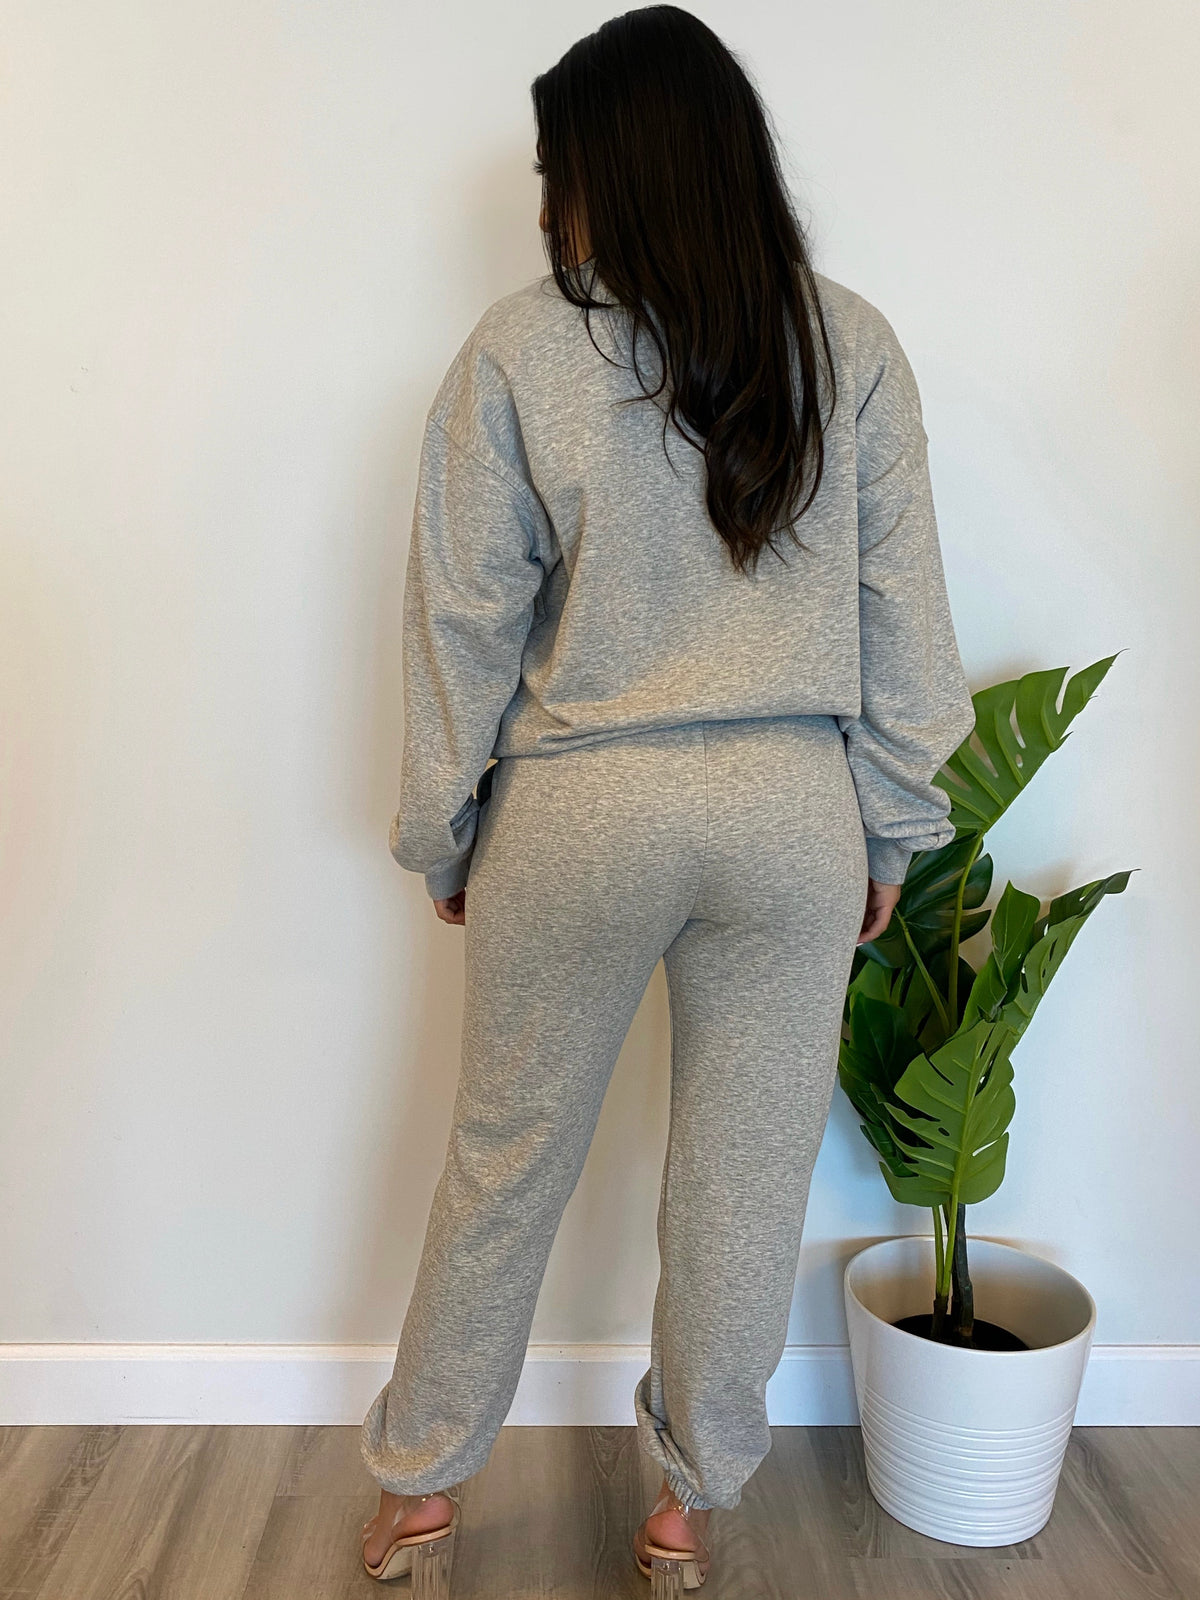 heather grey 2 piece, long sleeve crewneck, high waist joggers, drawstring, embroidered Los Angeles lettering